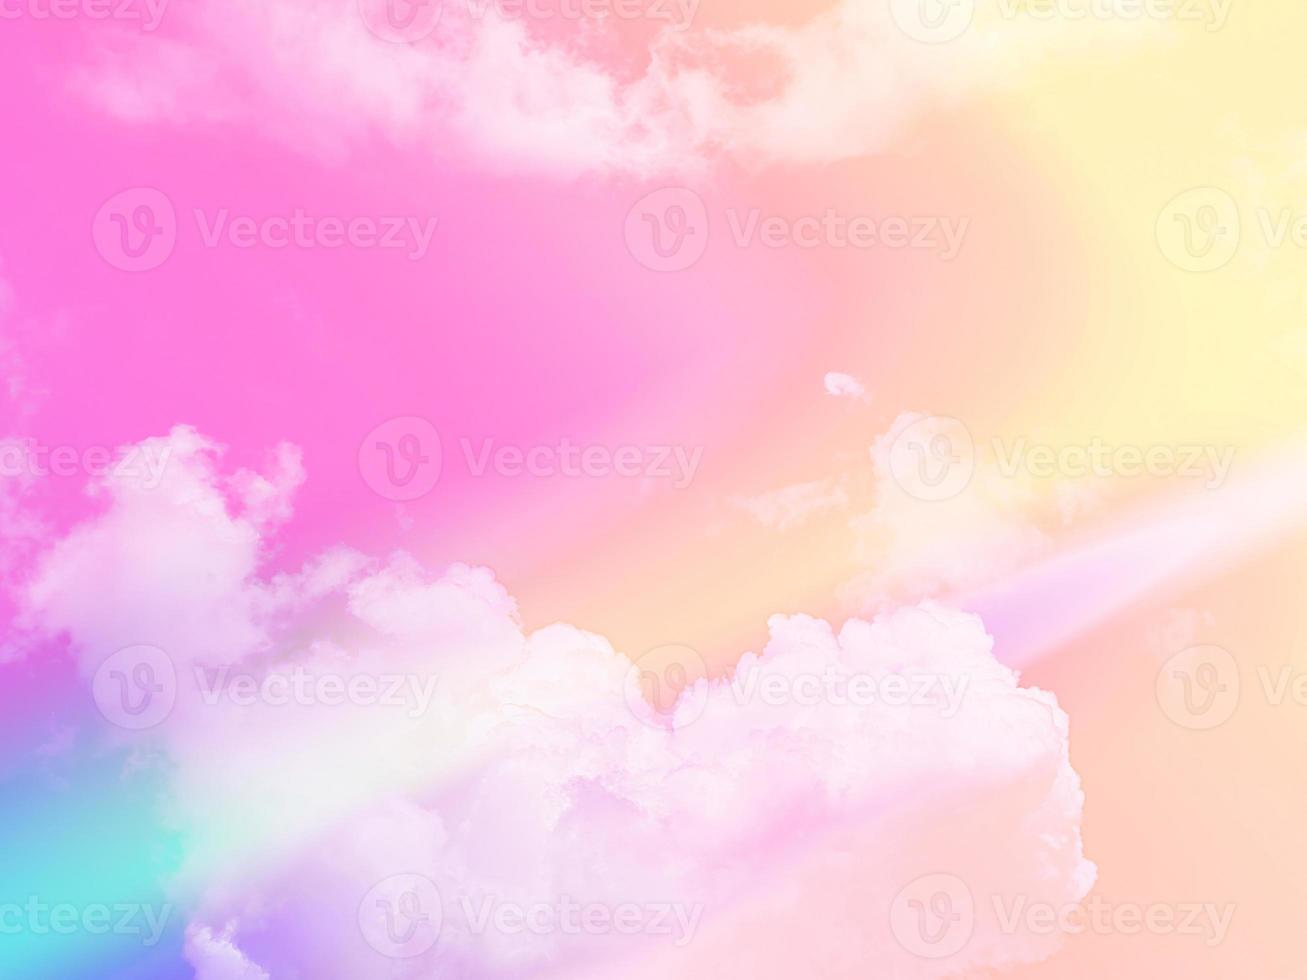 beauty sweet pastel pink yellow colorful with fluffy clouds on sky. multi color rainbow image. abstract fantasy growing light photo